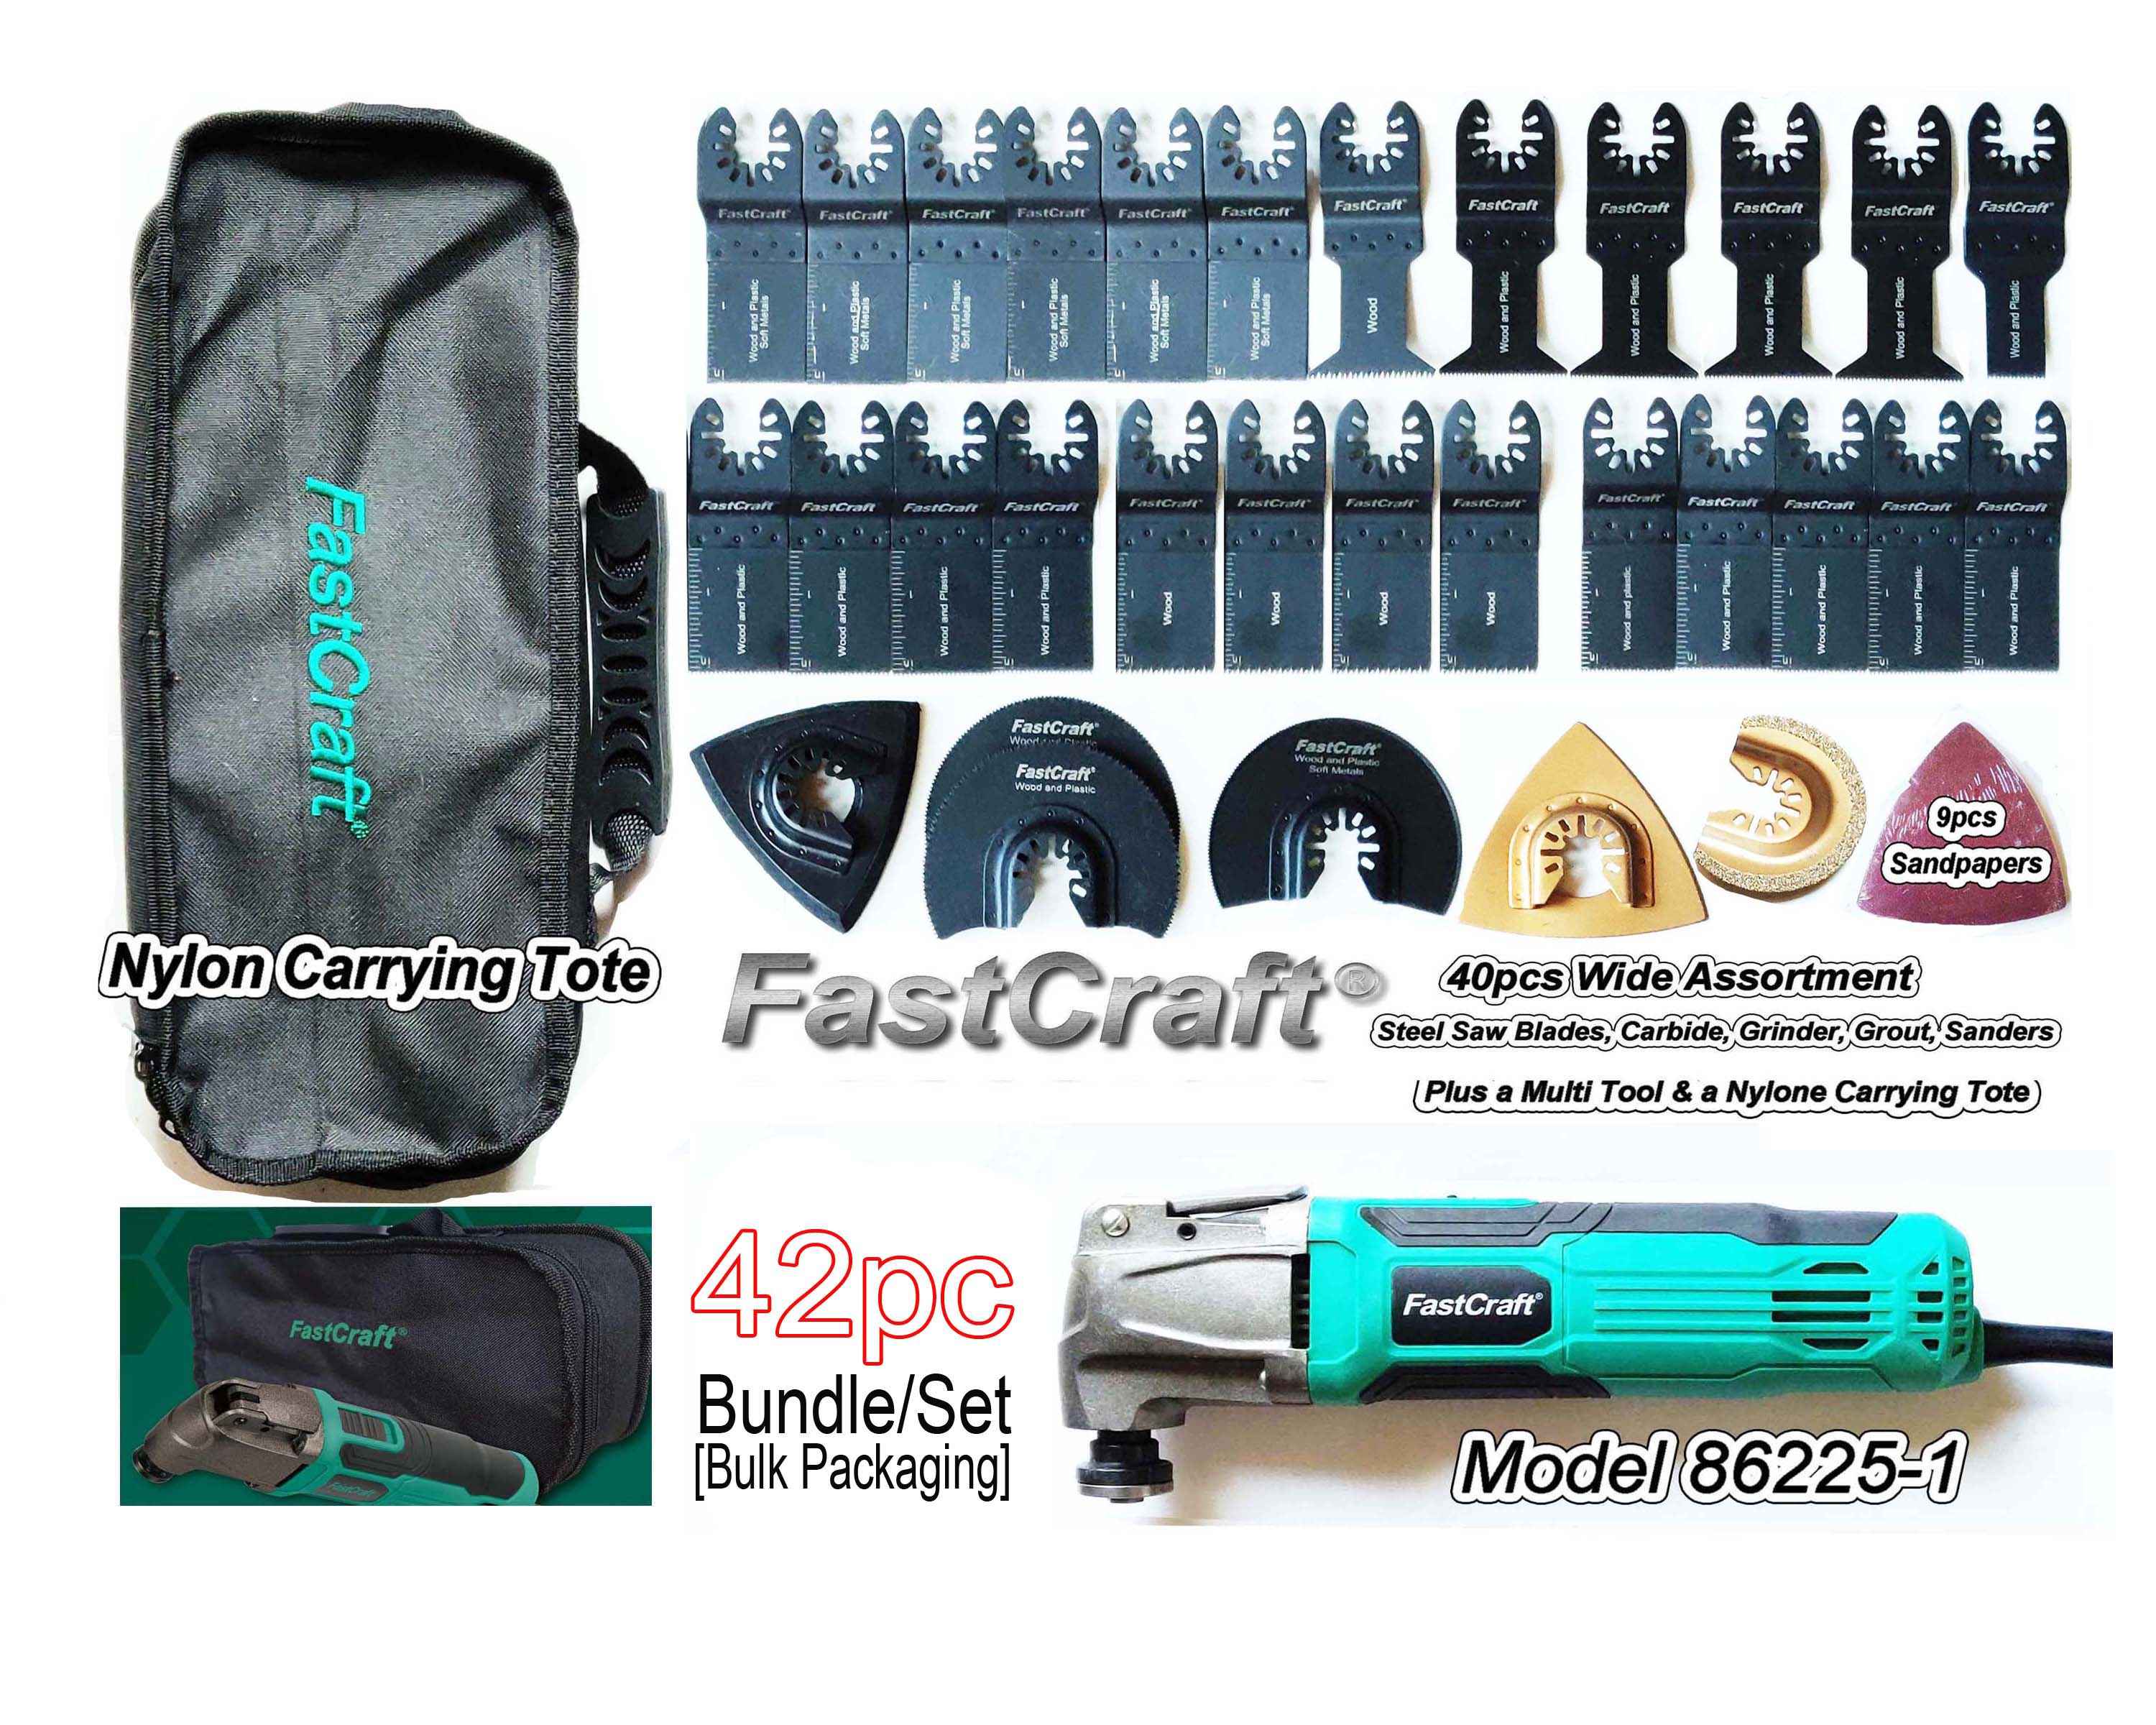 NYCL, FastCraft, tool, tools, oscillating, blade, blades, multi, multi tool,woodworking,twist,diamond blade,saw,nut setters,insert bits,adapters,router bits,glass,tile,construction,Lawn Garden Tools - Trimmers,metal working, high speed steel, twist drill bits, insert bit, bit, bits,HSS M7, M2, GB9341, GB4341, GB4241, M35 jobber, stubby, long type, aircraft extension, taper shank, twist drill bits, saw drill, end mills, woodworking tools, brad point drill bits, spade wood boring bits, forstner bits, saw drills, holesaws,carbide router bits, carbide glass/tile drill bits, masonry drill bits,carbide hammer drills, files/rasps, wire brushes, nut drivers, nutsetters,drill/drive tools, quick-change featured products, diamond saw blades, cordless drills, diamond saws, tool sets, tool kits, carbide router bits, SDS plus, brush, file, rasp, SDS Max, Spline, hand tools, brad point, ship auger bits, spade wood bits, insert bits, nutsetters,holesaws, quick change, forstner bits, router bits, masonry drills, twist drill, drill blanks, power tool, saw, saw blade, saw blades, grinder, sanding, sand, grind, reciprocating, chuck